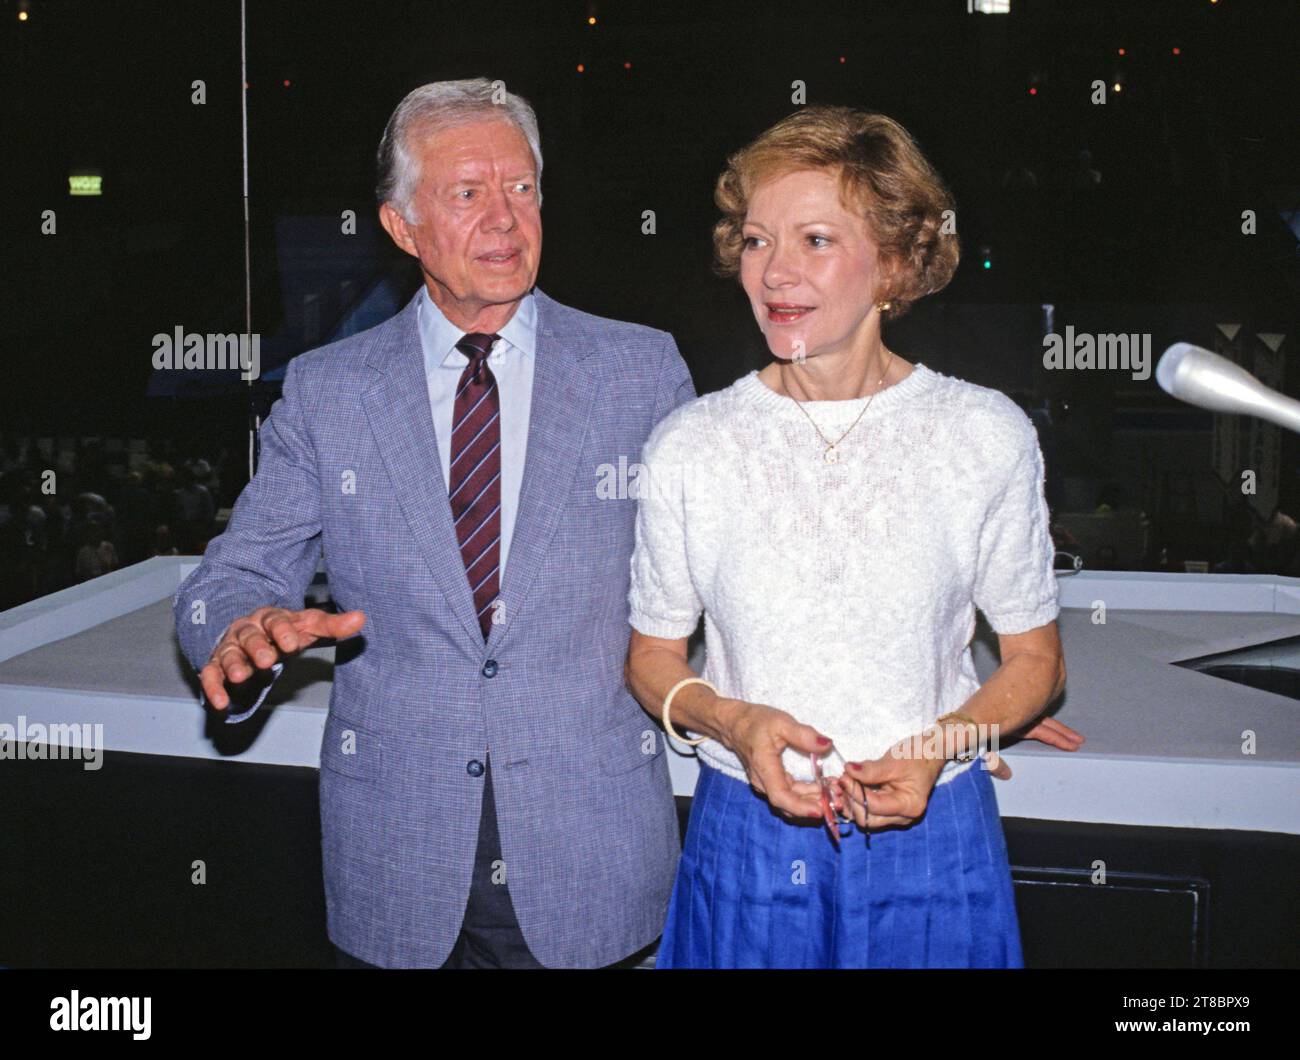 **FILE PHOTO** Rosalynn Carter Has Passed Away. Former United States President Jimmy Carter, accompanied by his wife, former first lady Rosalynn Carter, visits the Omni Coliseum in Atlanta, Georgia prior to his addressing the 1988 Democratic National Convention on July 18, 1988. Copyright: xArniexSachsx Credit: Imago/Alamy Live News Stock Photo